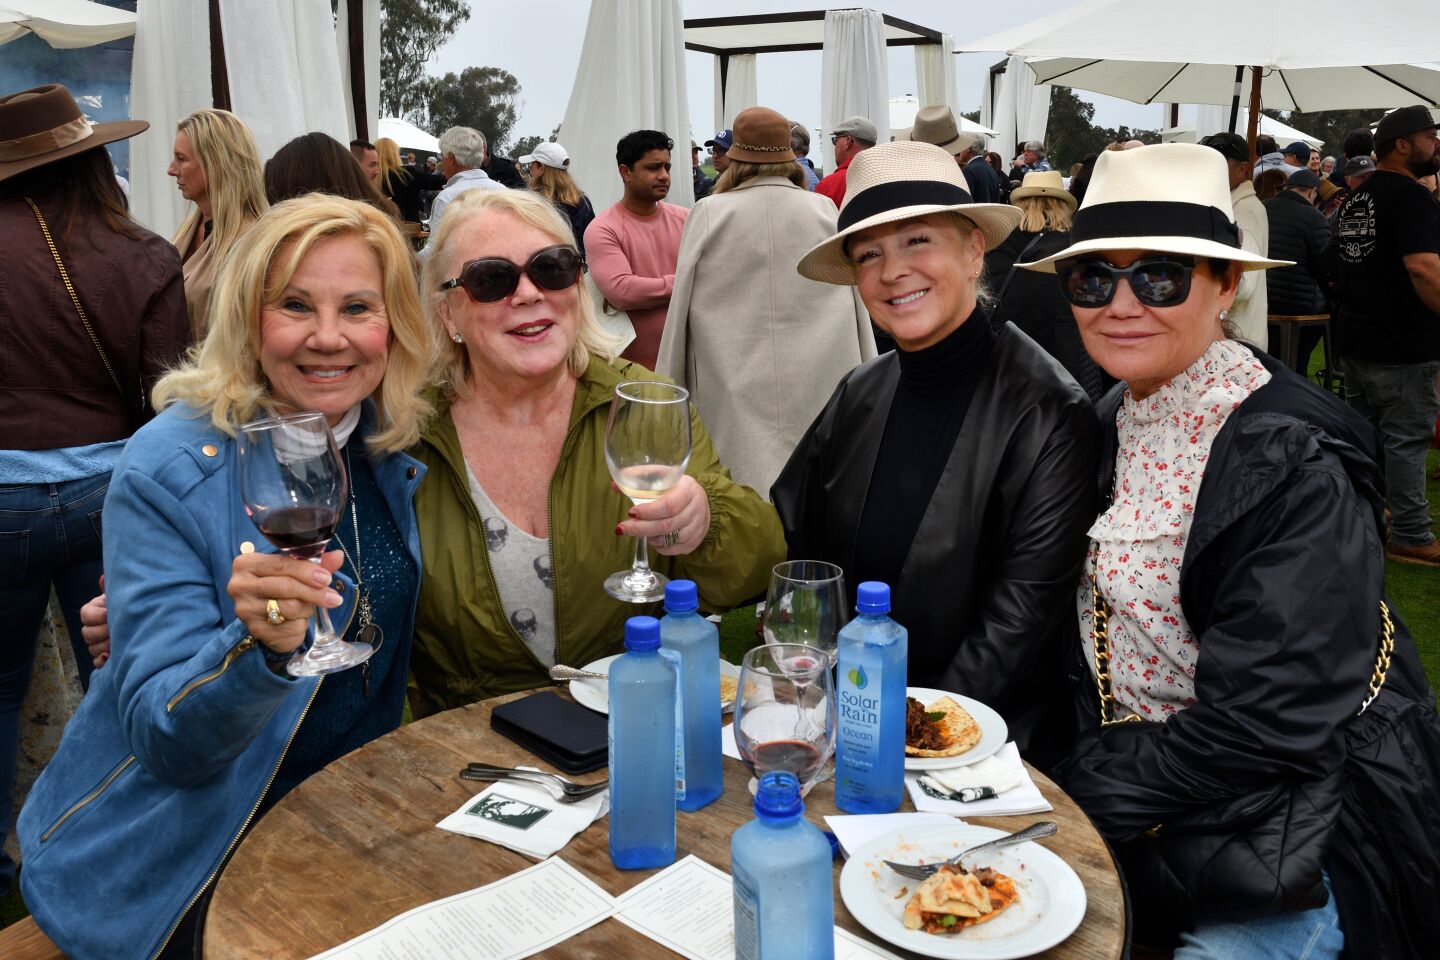 Lezlie Reynales, Margaret Jackson, Jeane Kim and Celia Hemely get festive at the annual “Celebrate the Craft” food festival April 3 at The Lodge at Torrey Pines in La Jolla.